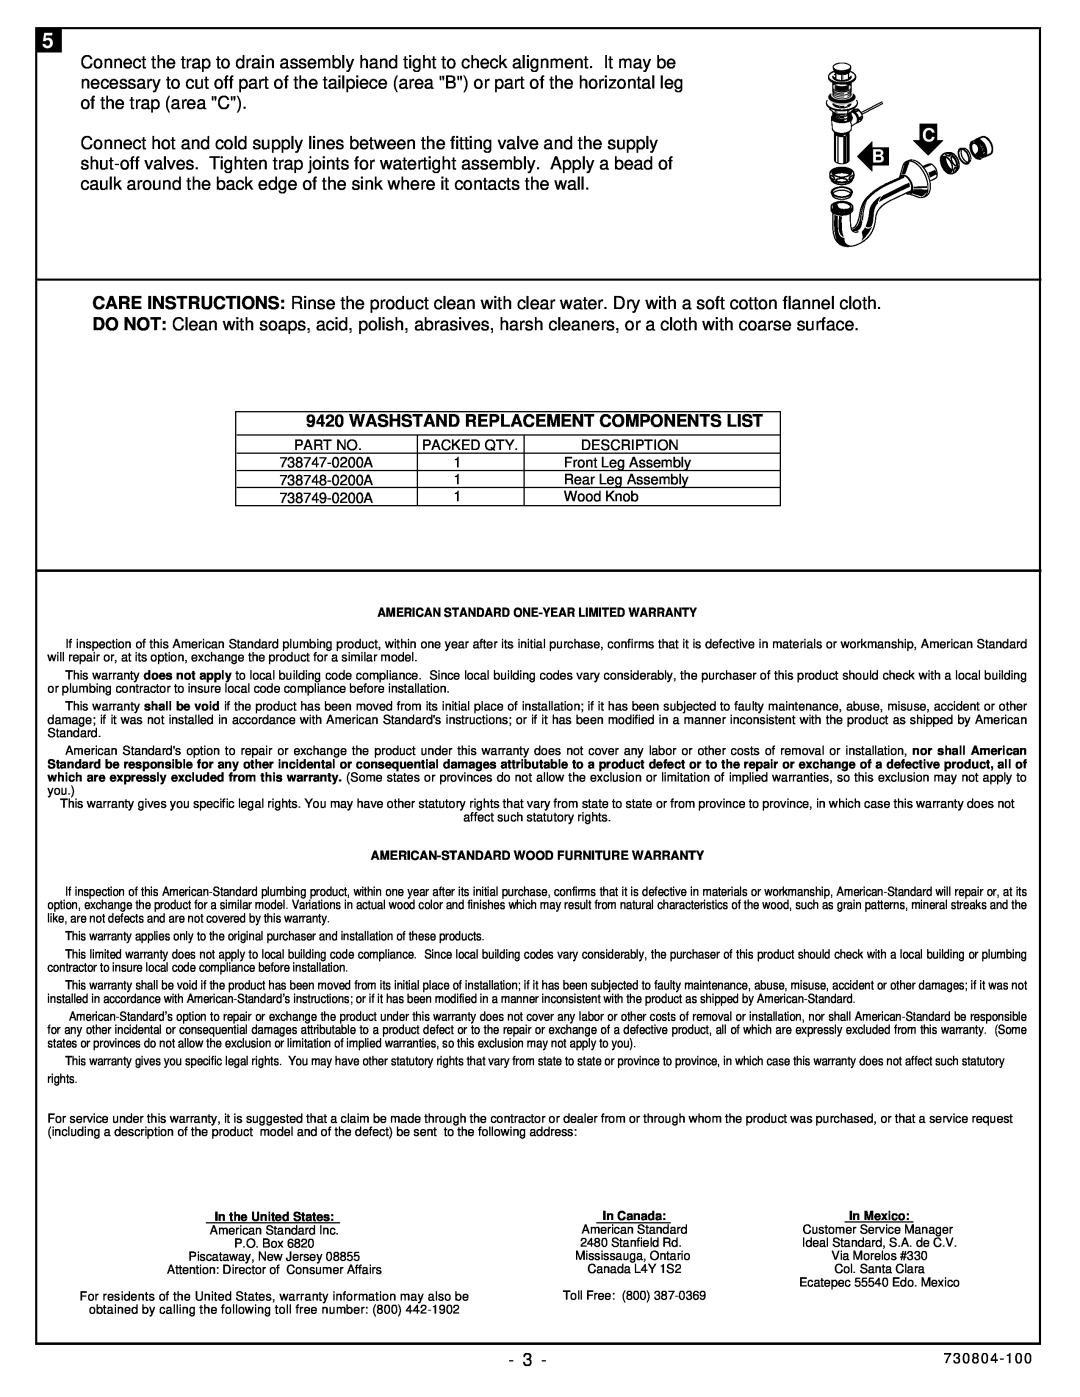 American Standard 9422.020 installation instructions Washstand Replacement Components List 